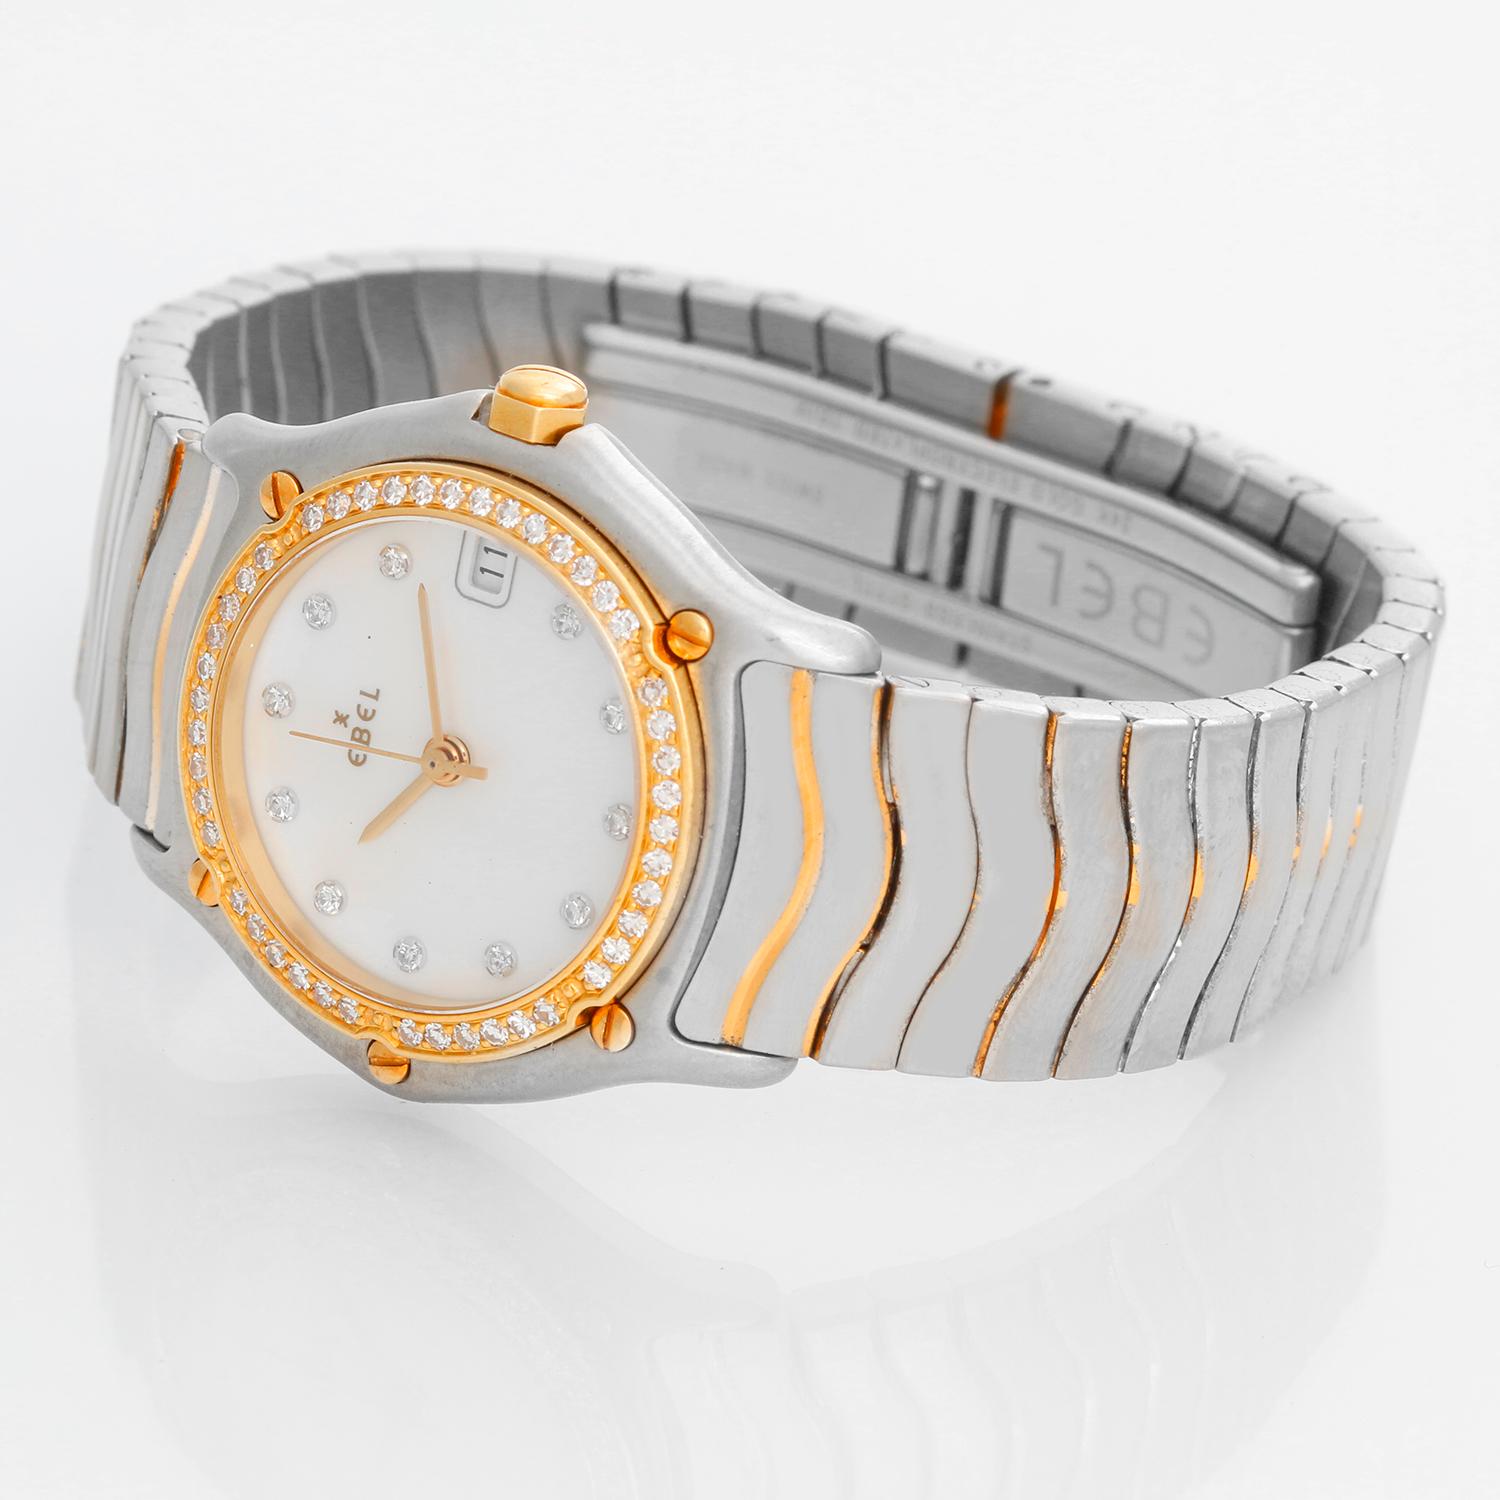 Ebel Beluga Stainless Steel & Diamond Wave Ladies Watch - Quartz movement. Stainless steel case with diamond bezel (26mm diameter). Mother of pearl dial diamond hour markers. Stainless steel bracelet (will fit apx. 5 3/4-inch wrist). Pre-owned with